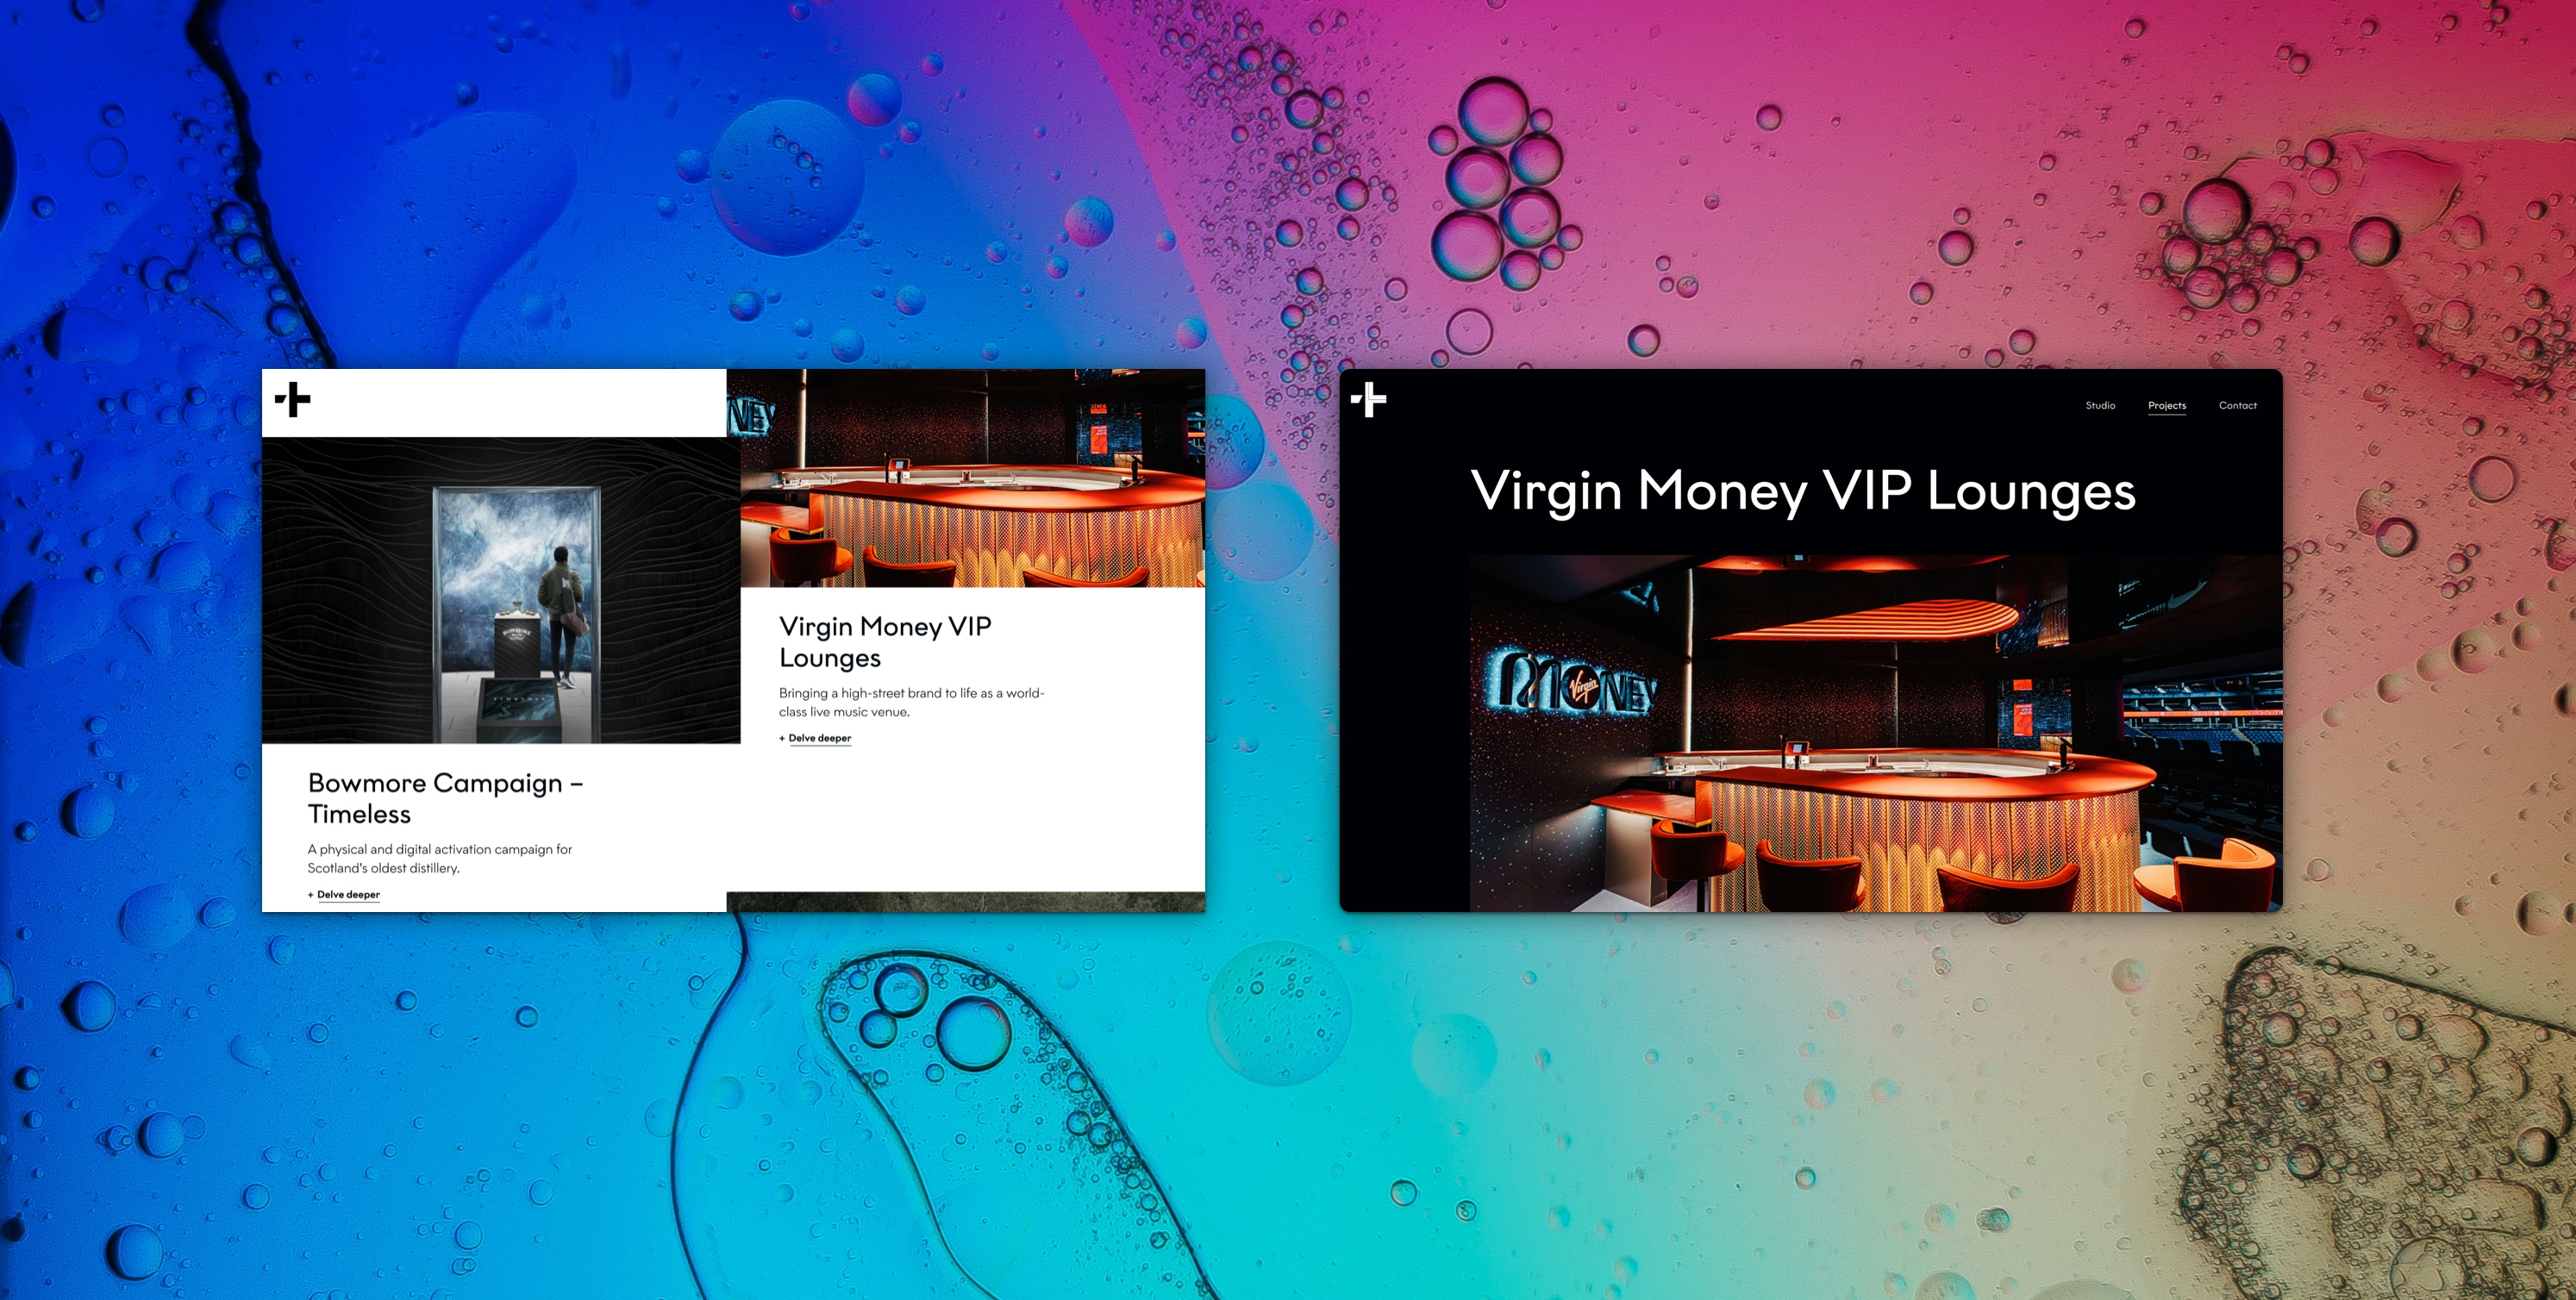 Two landscape web pages sit on a blue and pink liquid background. The first page has an image for “Bowmore Campaign - Timeless” and features a dark image of an image of a door. Inside the door is a man looking to a sky background. This overlays a second image of a bar for “Virgin Money VIP Lounges”. Second page is an image of a bar for “Virgin Money VIP Lounges”.